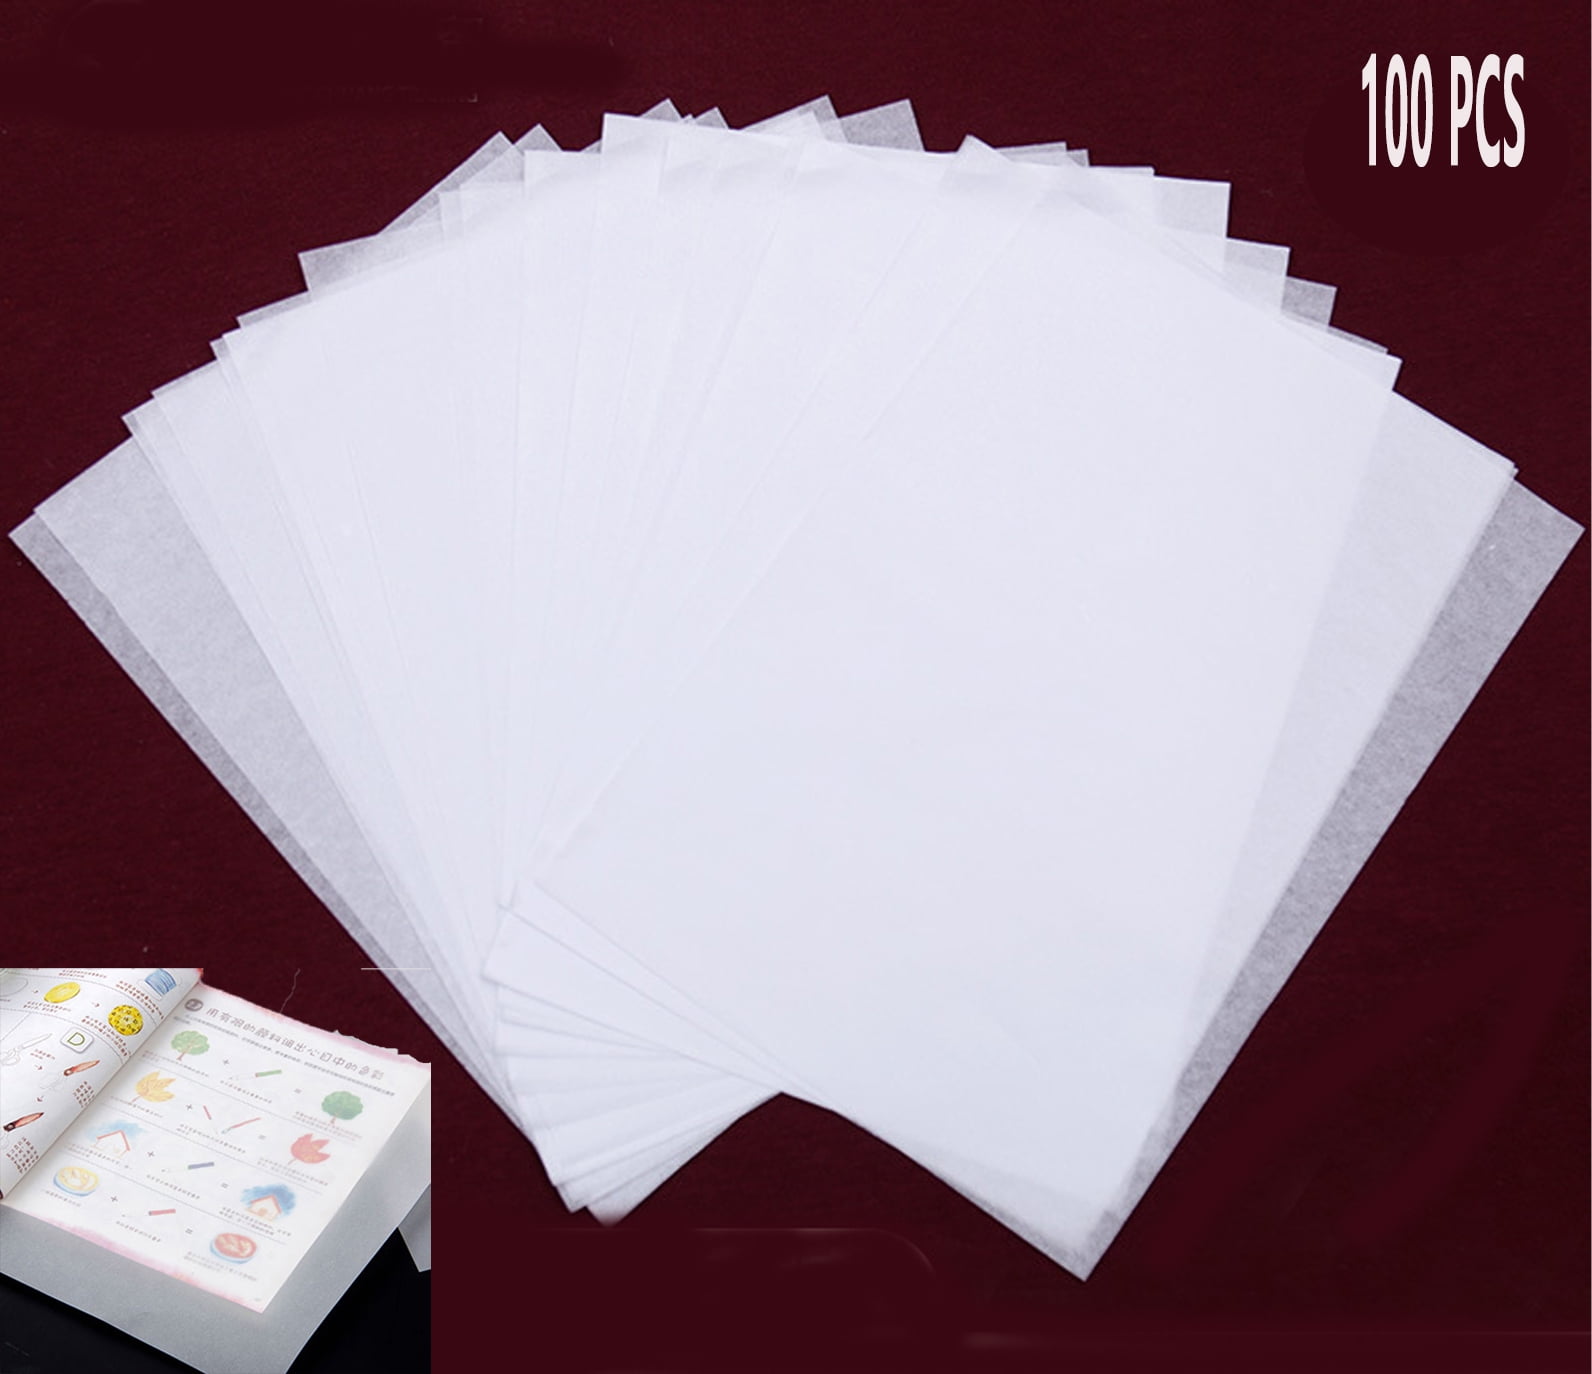 Garosa 100Pcs A4 Translucent Tracing Transfer Sulfuric Acid Papers for  Copying Drawing Calligraphy , Translucent Tracing Paper, Tracing Paper